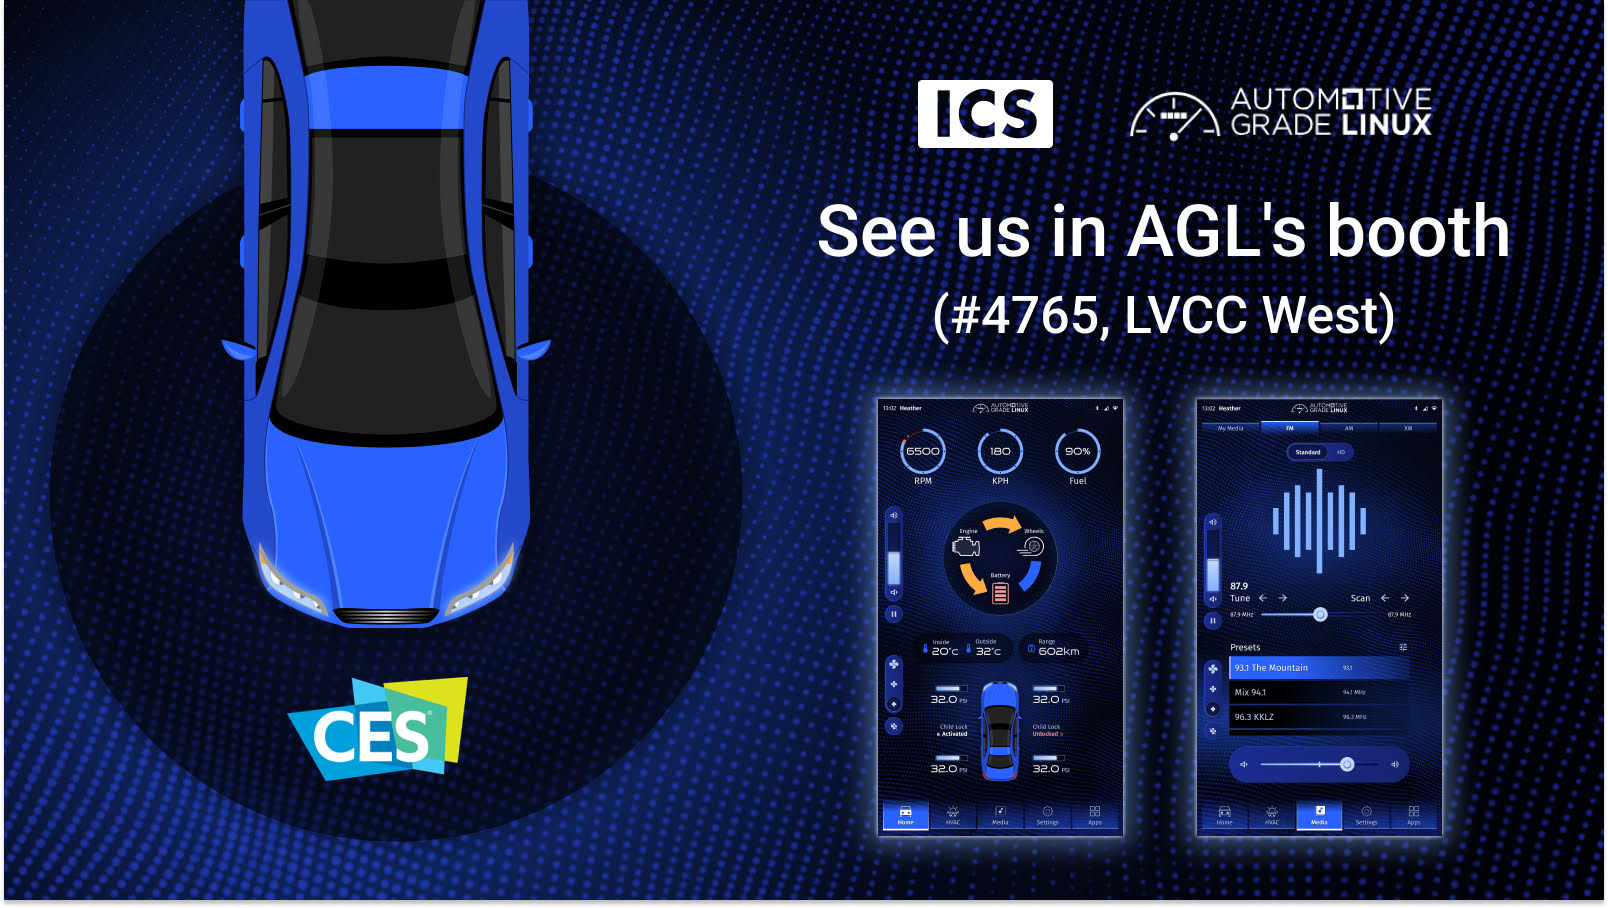 ICS in AGL's booth at CES